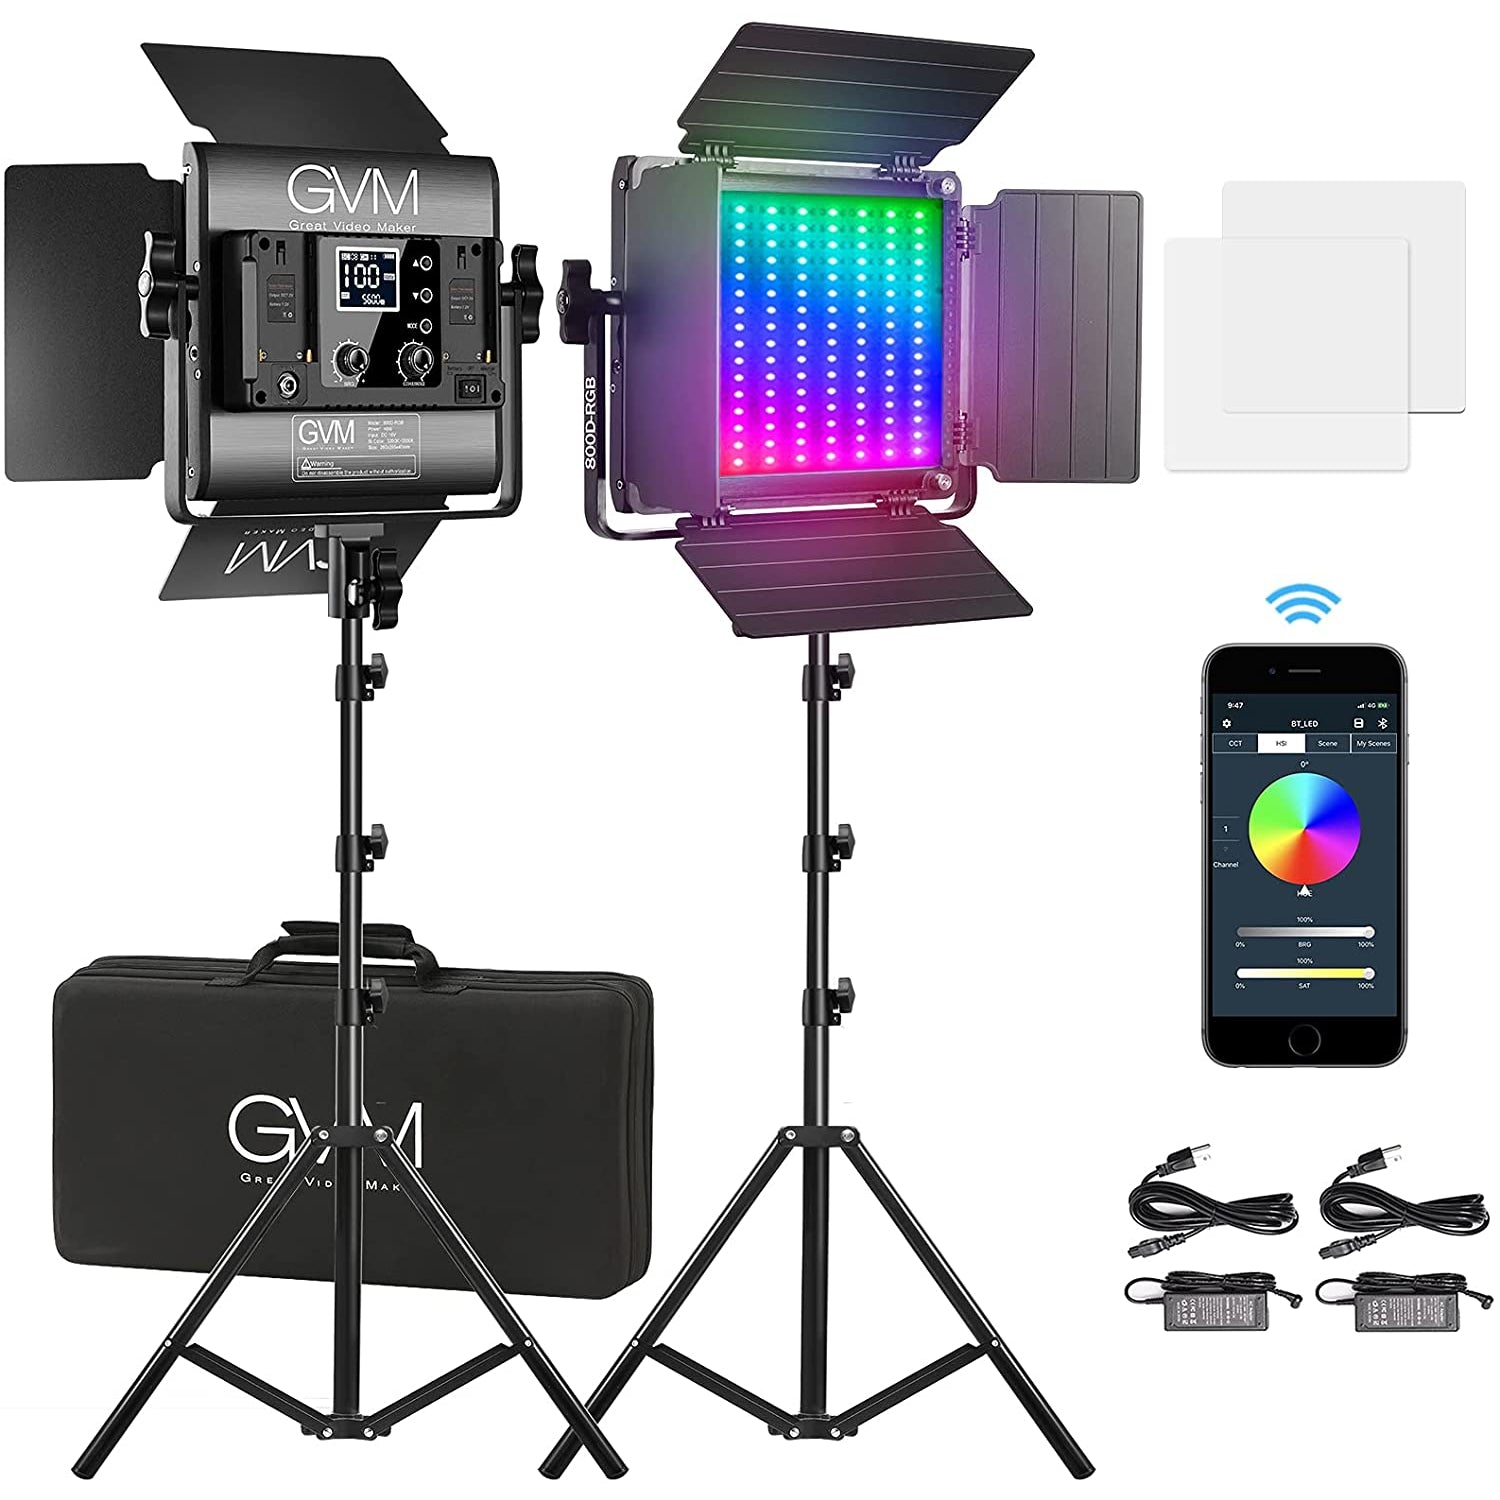 GVM Led Video Light, RGB LED Lighting Kit with APP Control, 800D Photography Lighting with Stand, 2 Packs LED Panel for Video Studio Photography